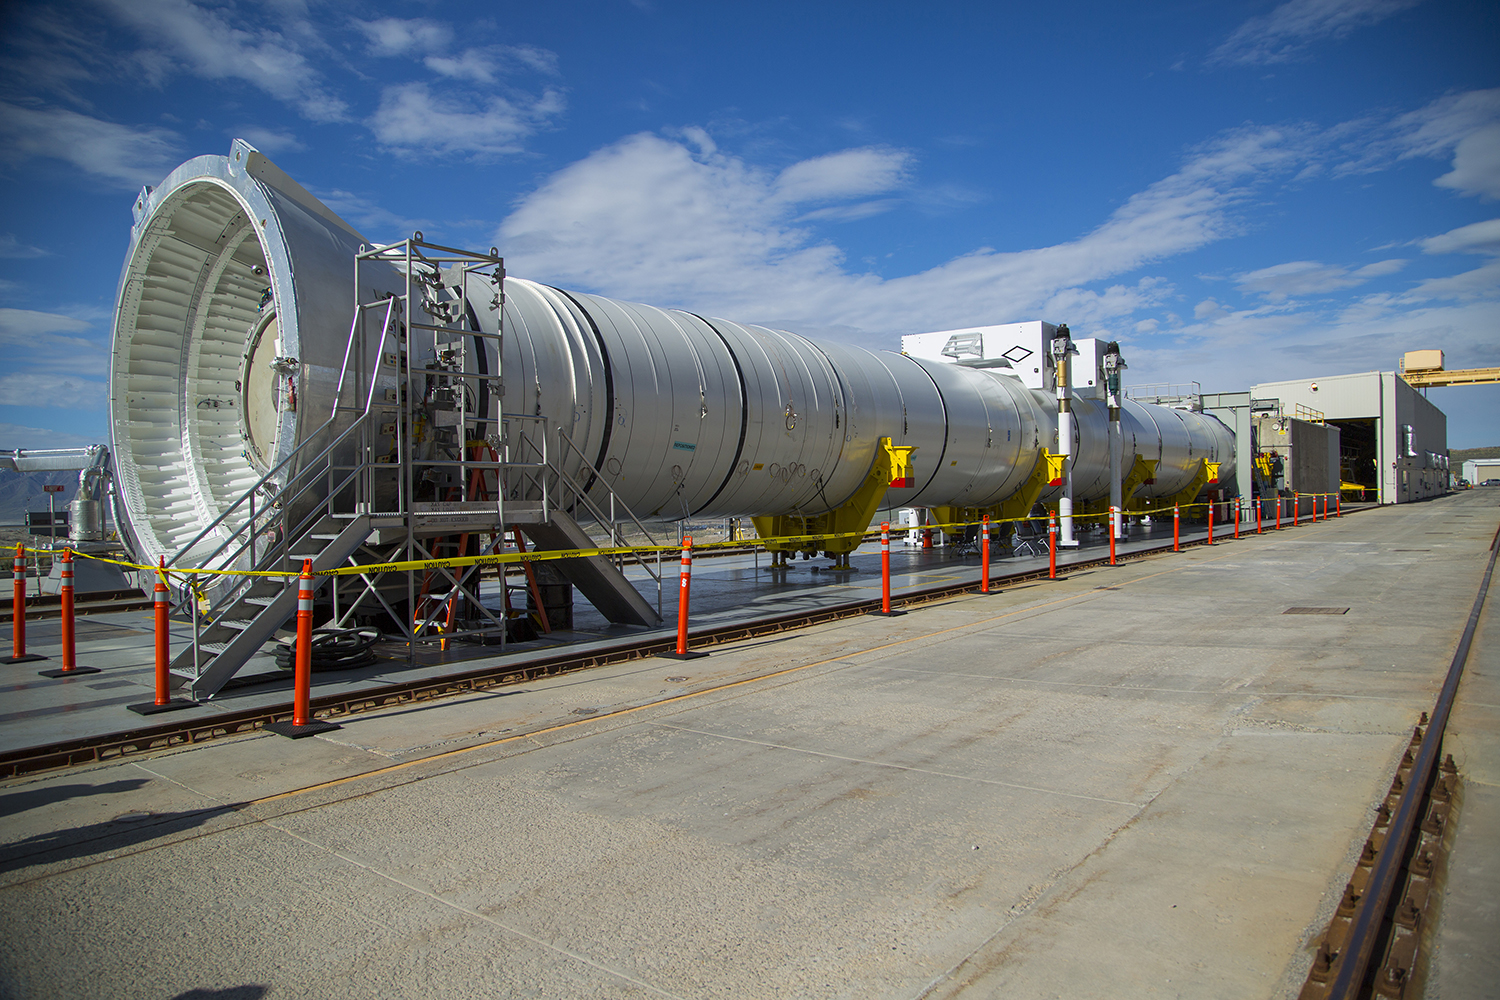 Test version of the booster for NASA's new rocket, the Space Launch System